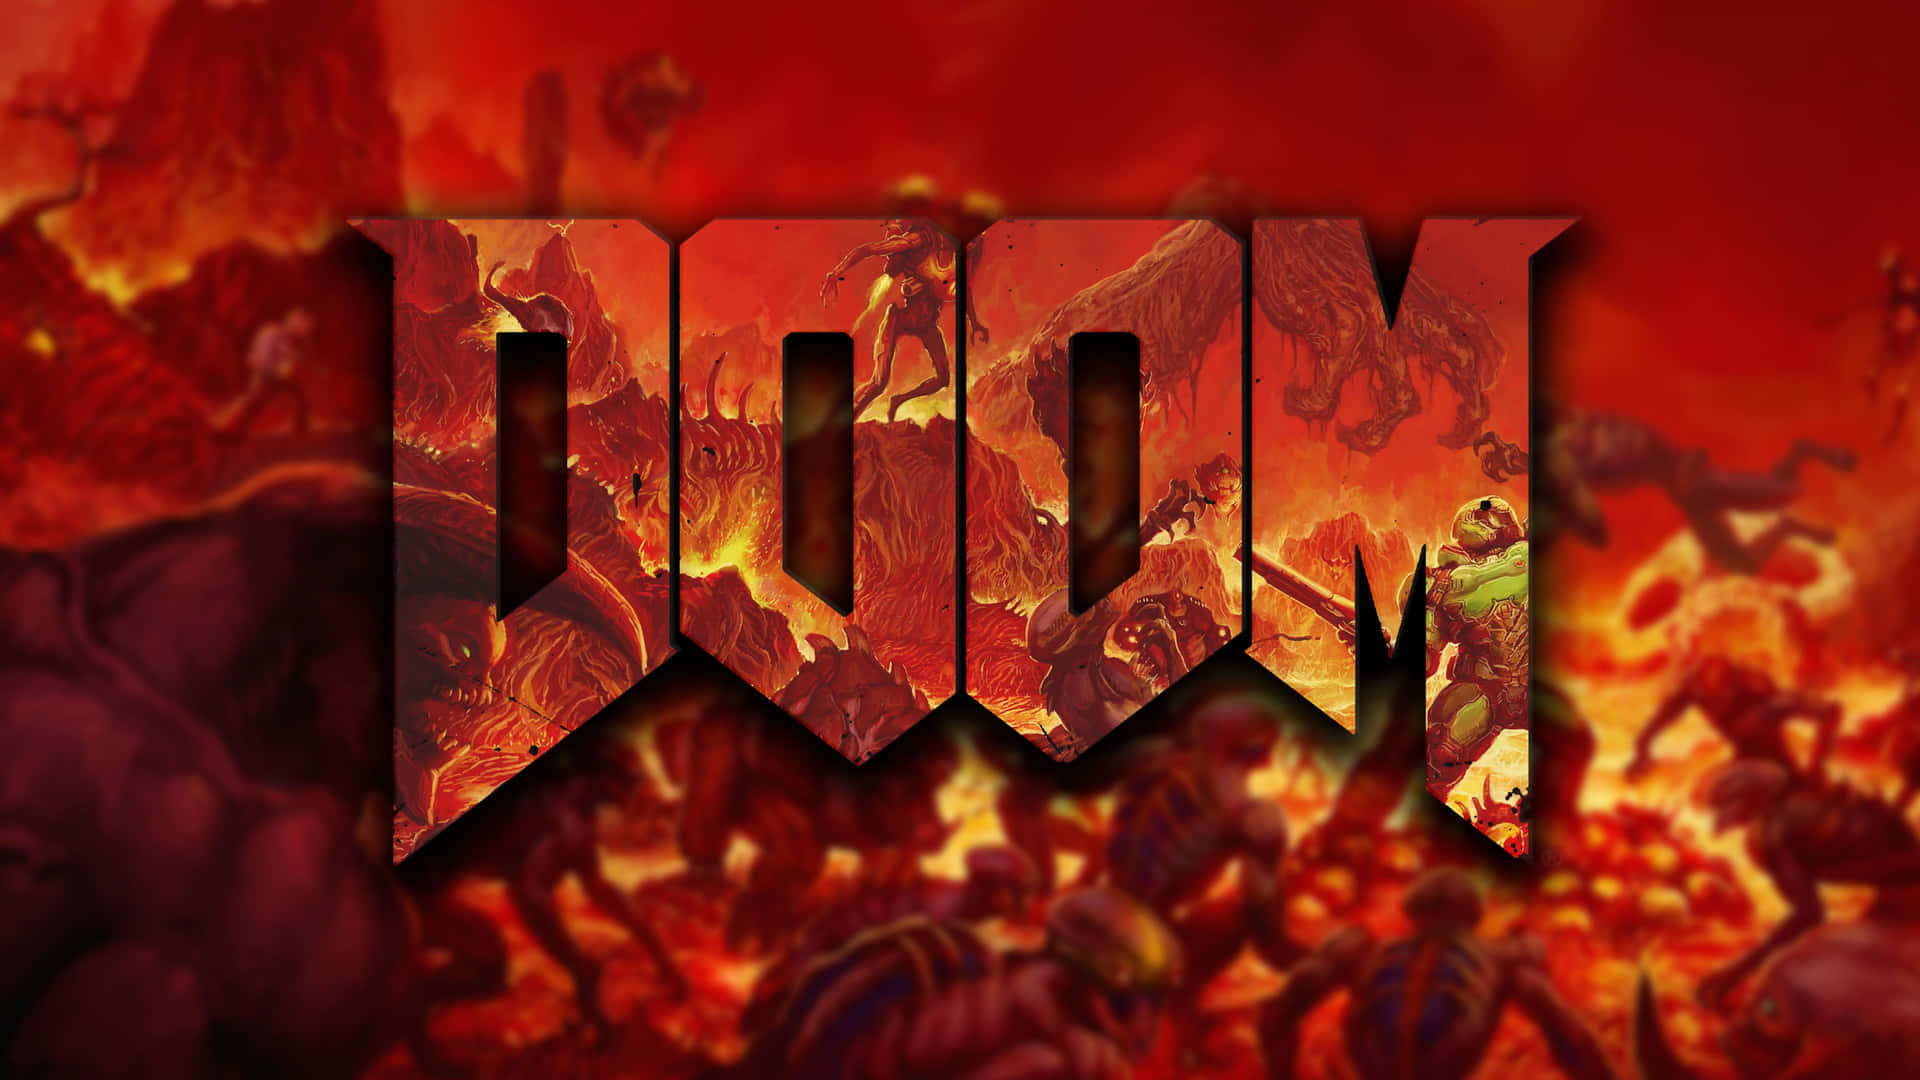 Battle your way through hordes of enemy forces in Doom 2016! Wallpaper